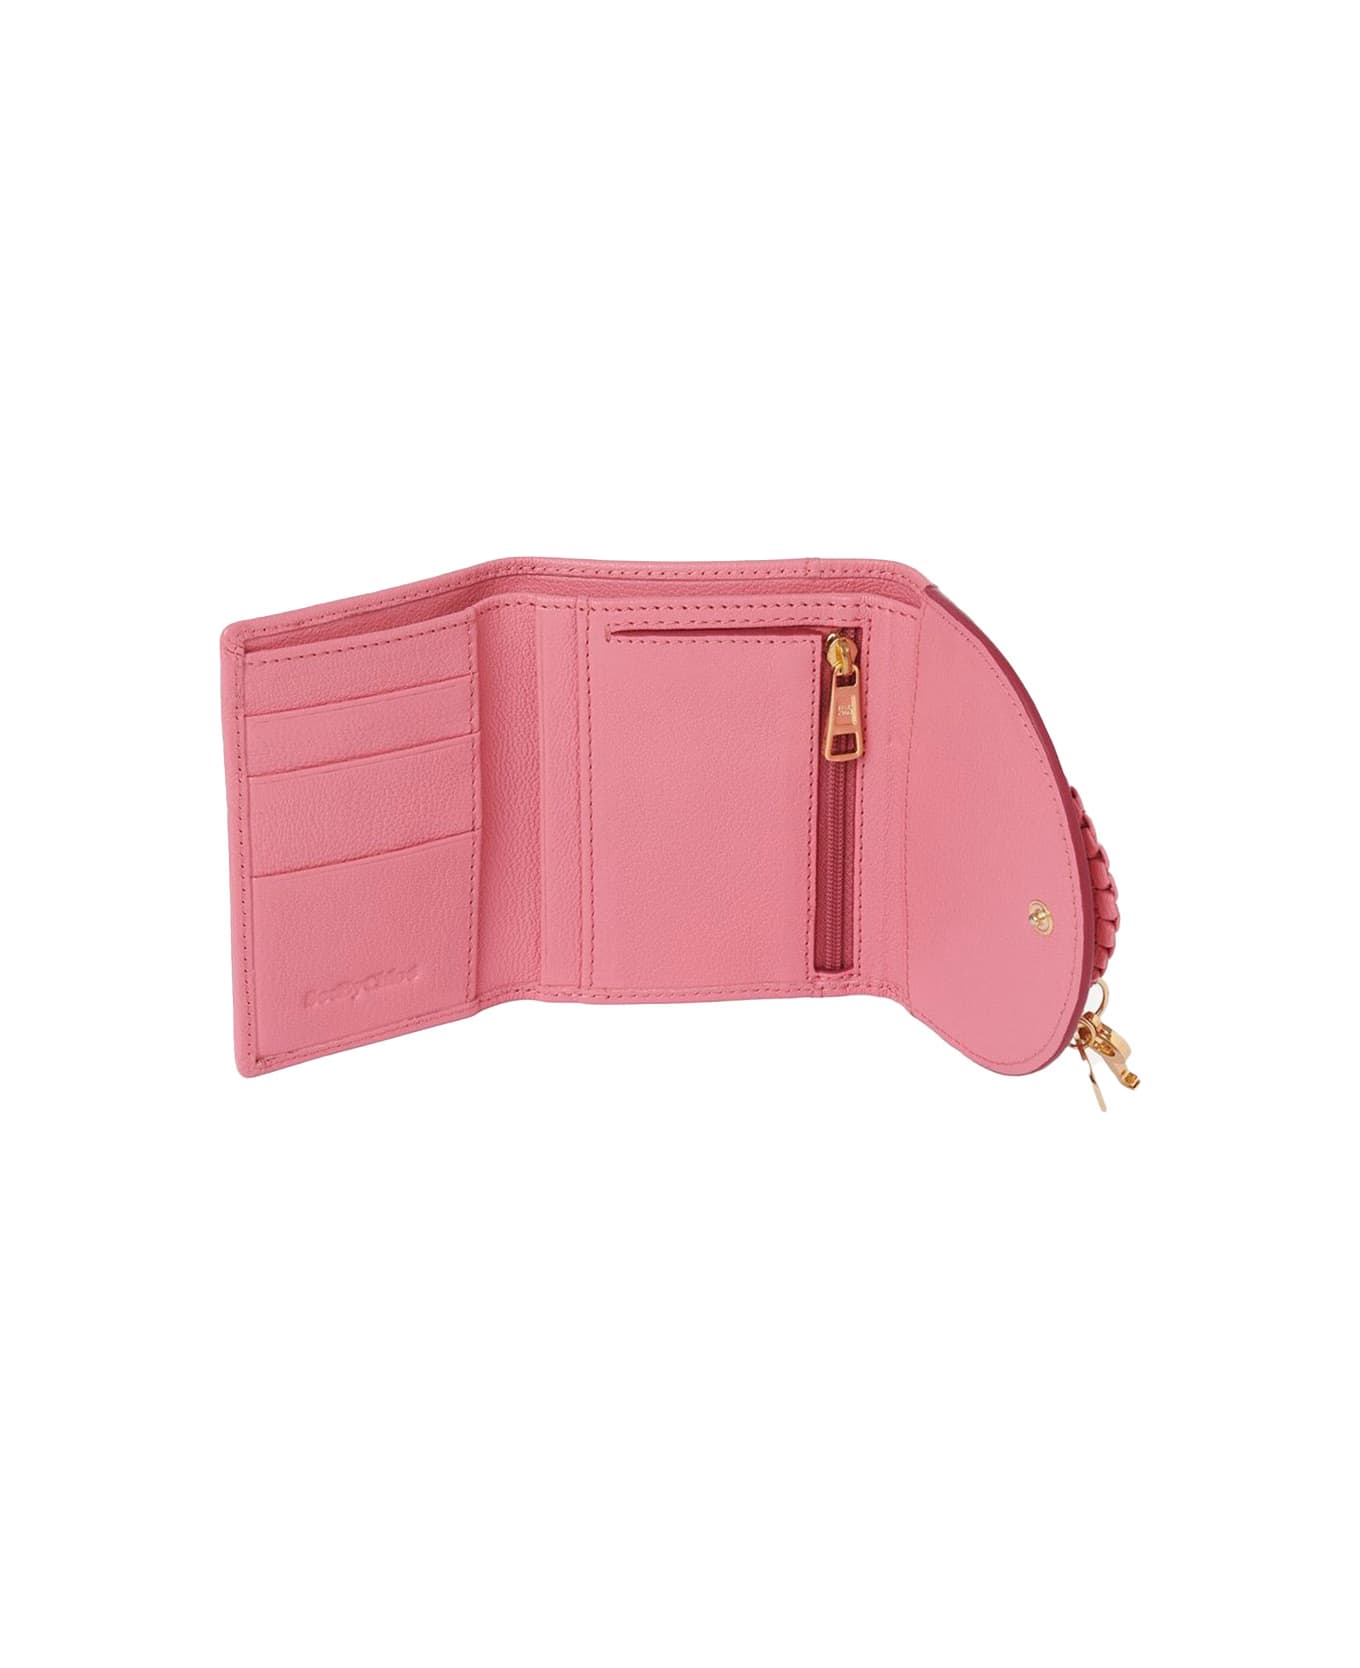 See by Chloé Wallet - PUSHY PINK 財布